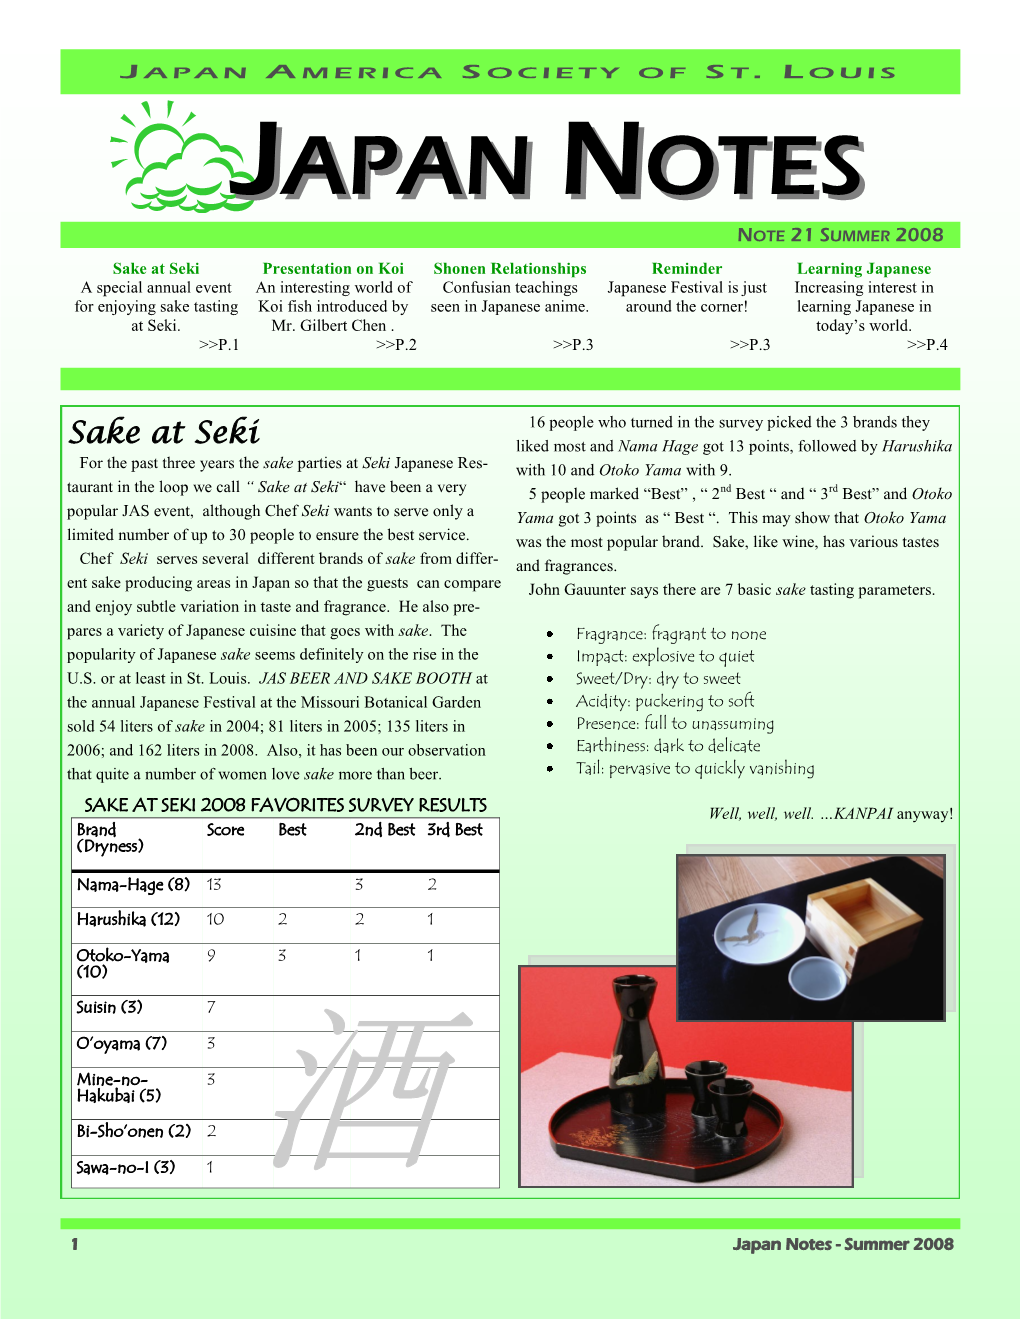 Japan Notes - Summer 2008 J APAN a MERICA S OCIETY of S T